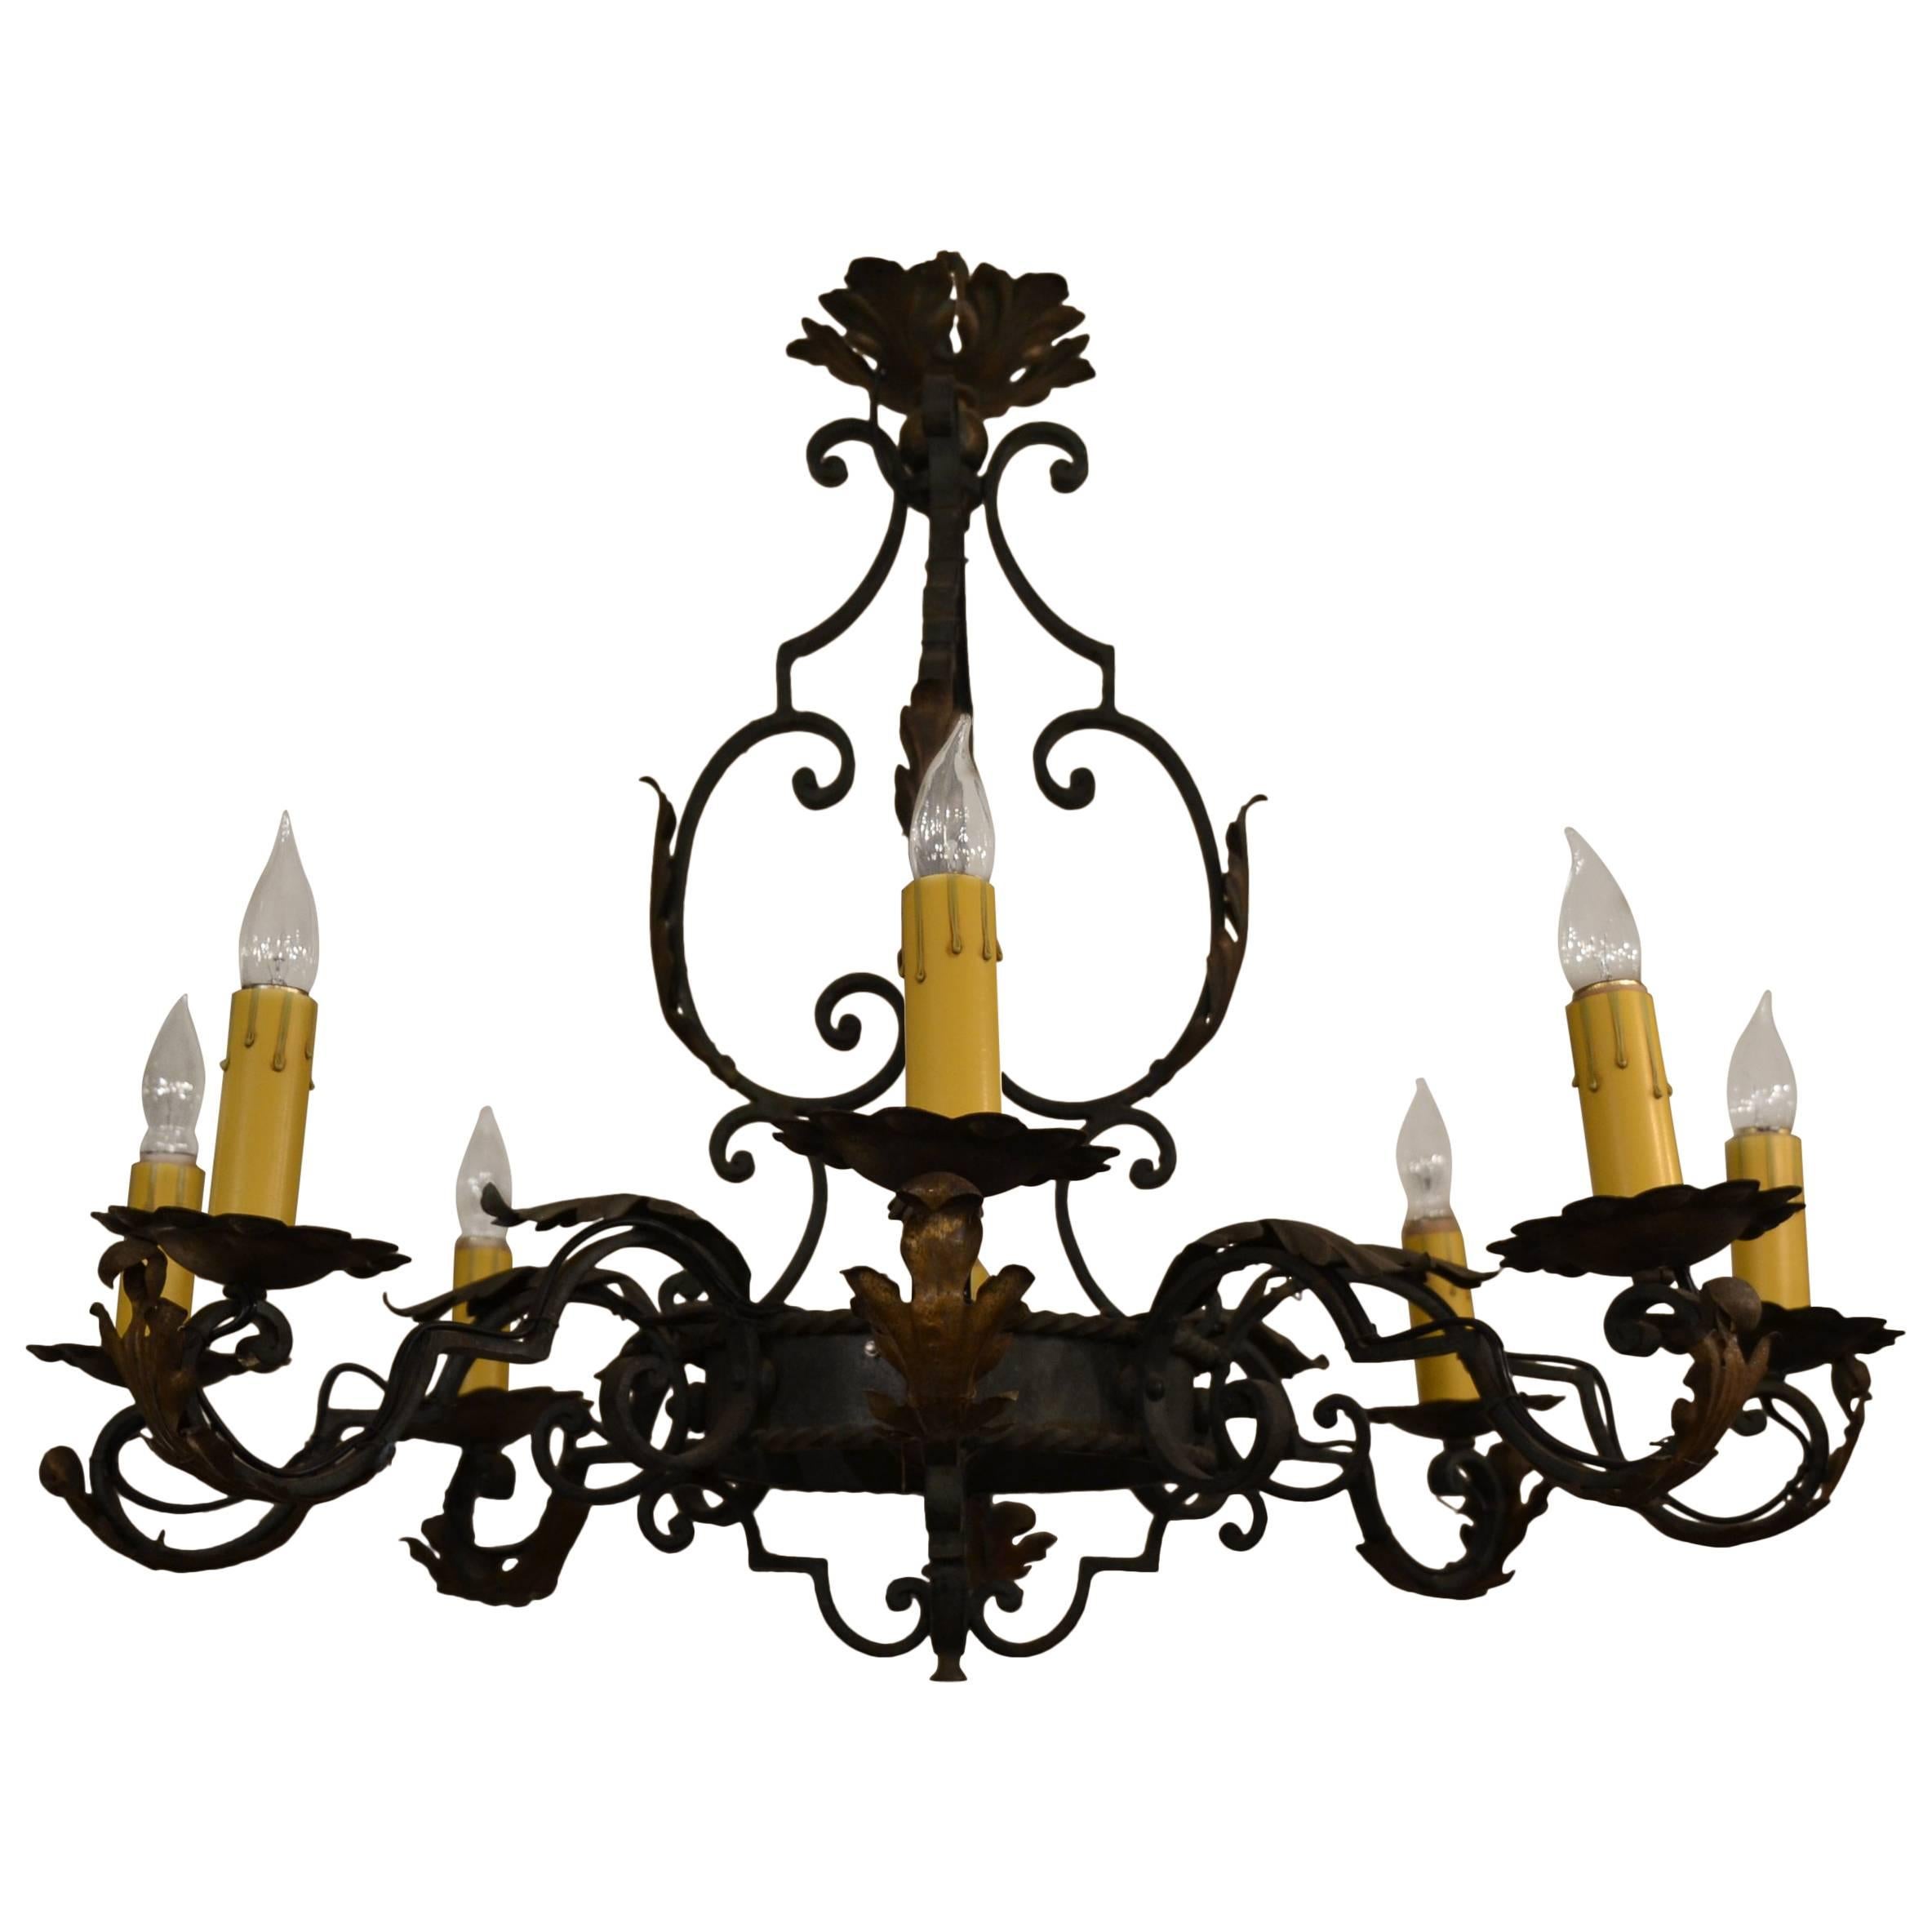 Antique French Wrought Iron Chateau Light